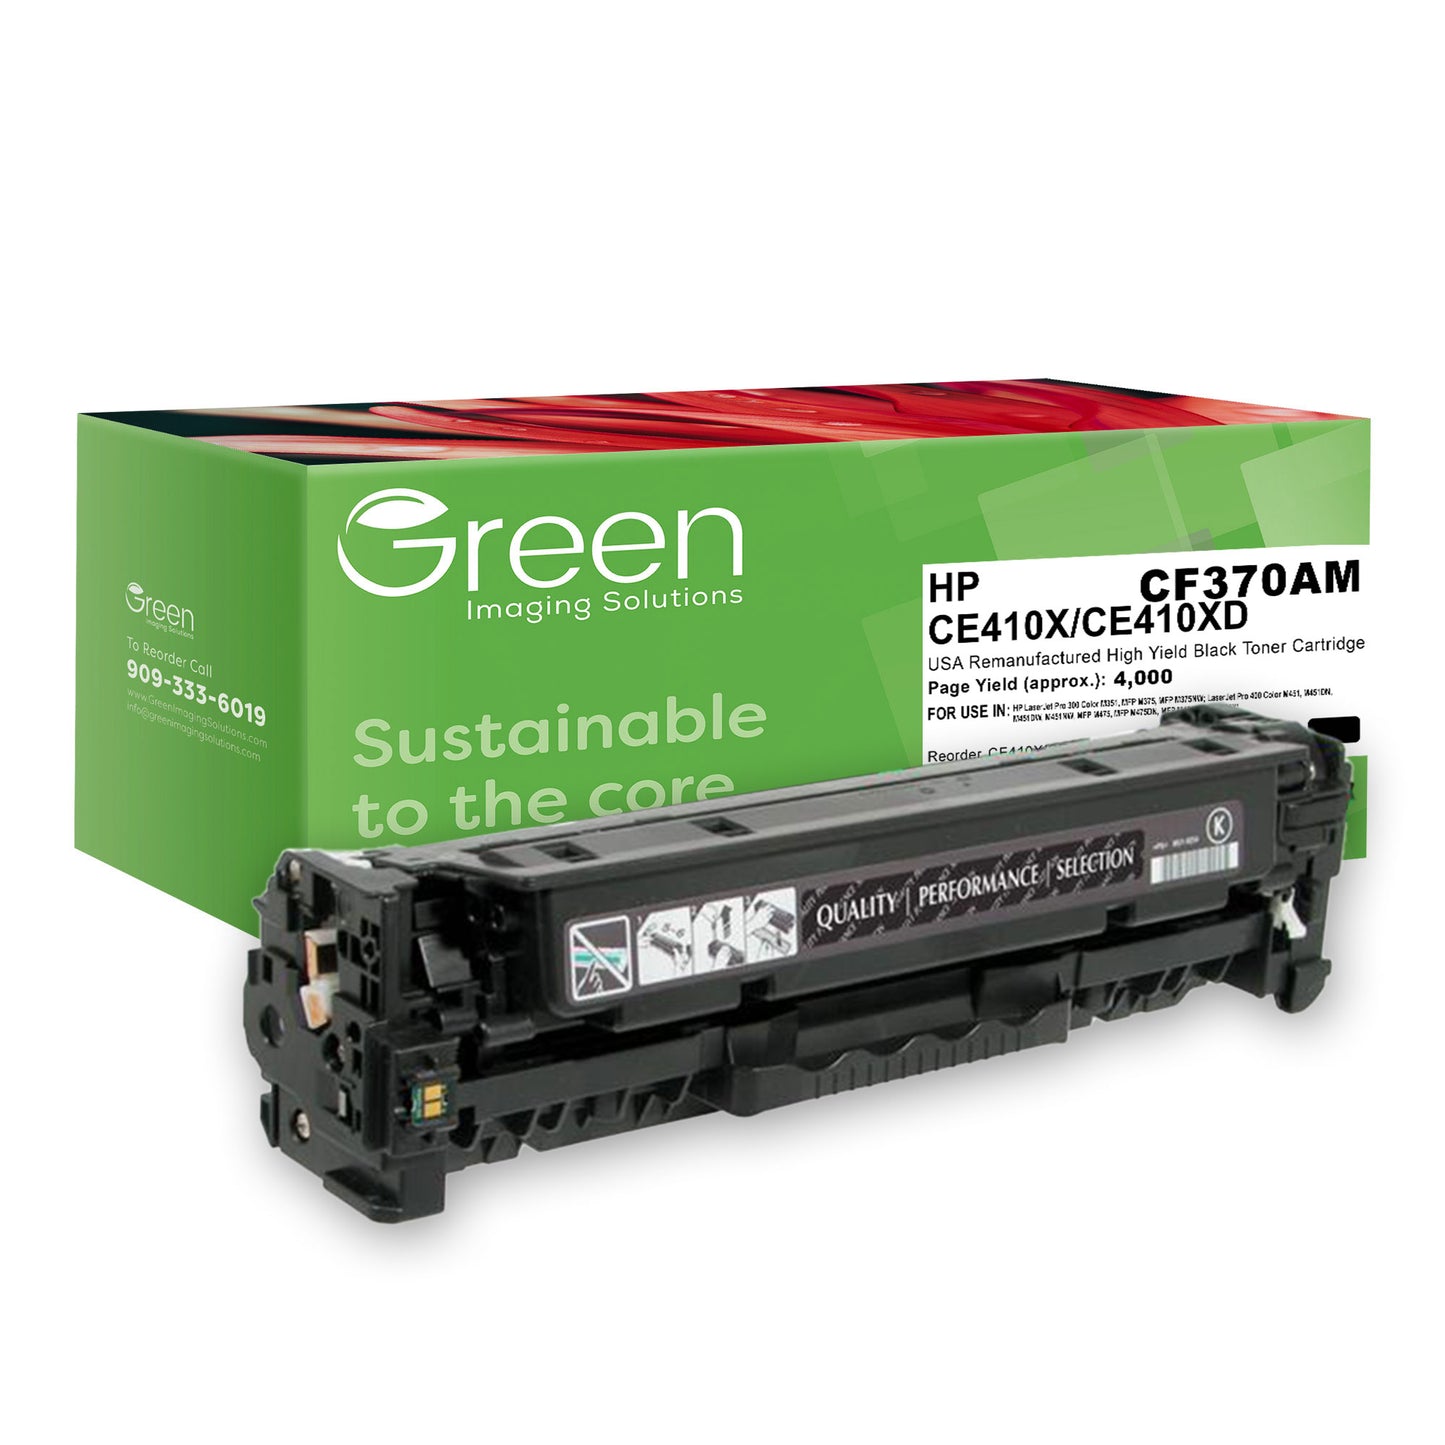 GIS USA Remanufactured High Yield Black Toner Cartridge for HP CE410X (HP 305X)